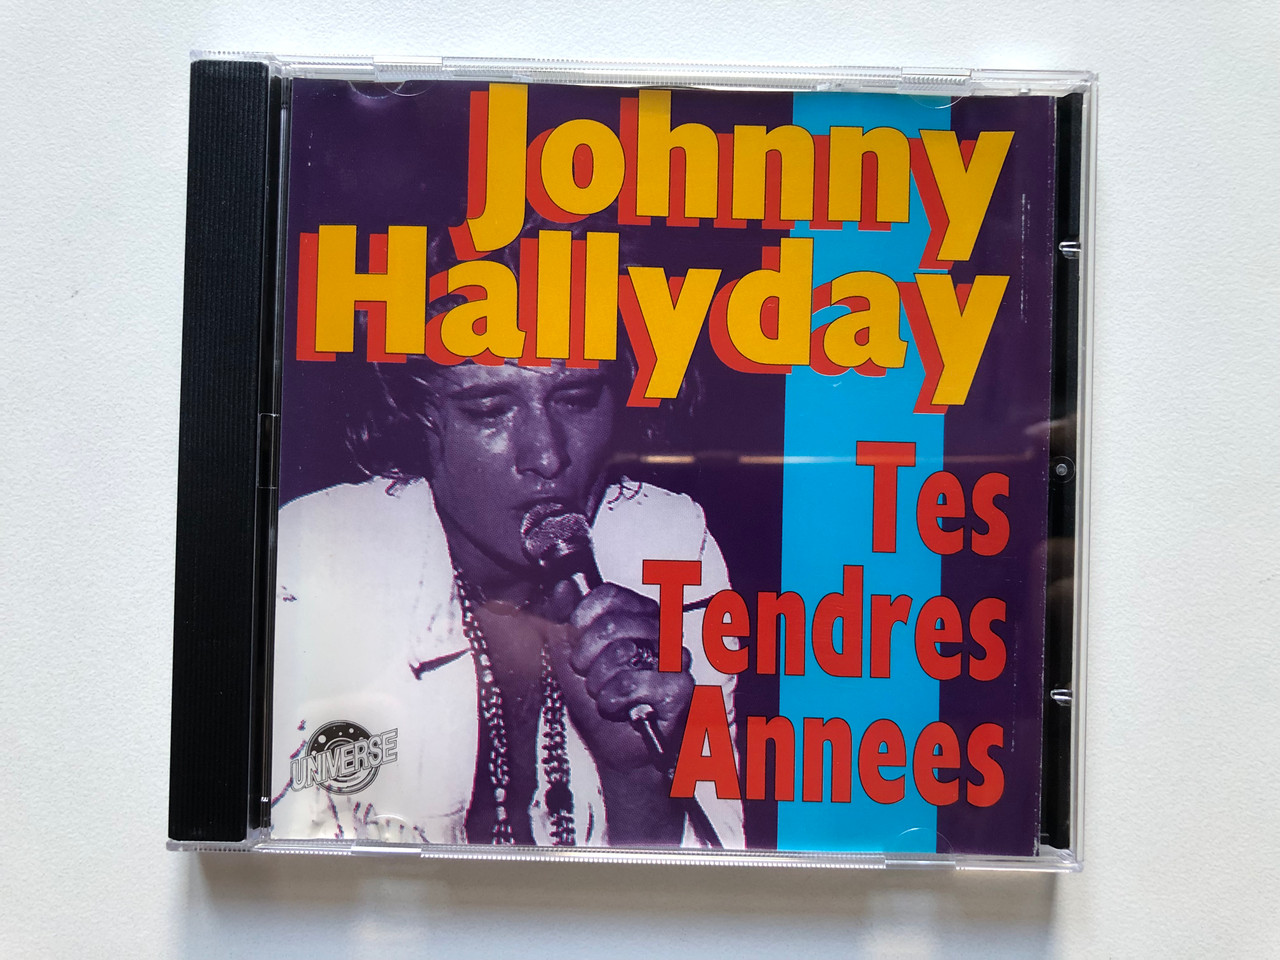 https://cdn10.bigcommerce.com/s-62bdpkt7pb/products/0/images/307436/Johnny_Hallyday_Tes_Tendres_Annees_Universe_Audio_CD_UN_2037_1__01570.1698660205.1280.1280.JPG?c=2